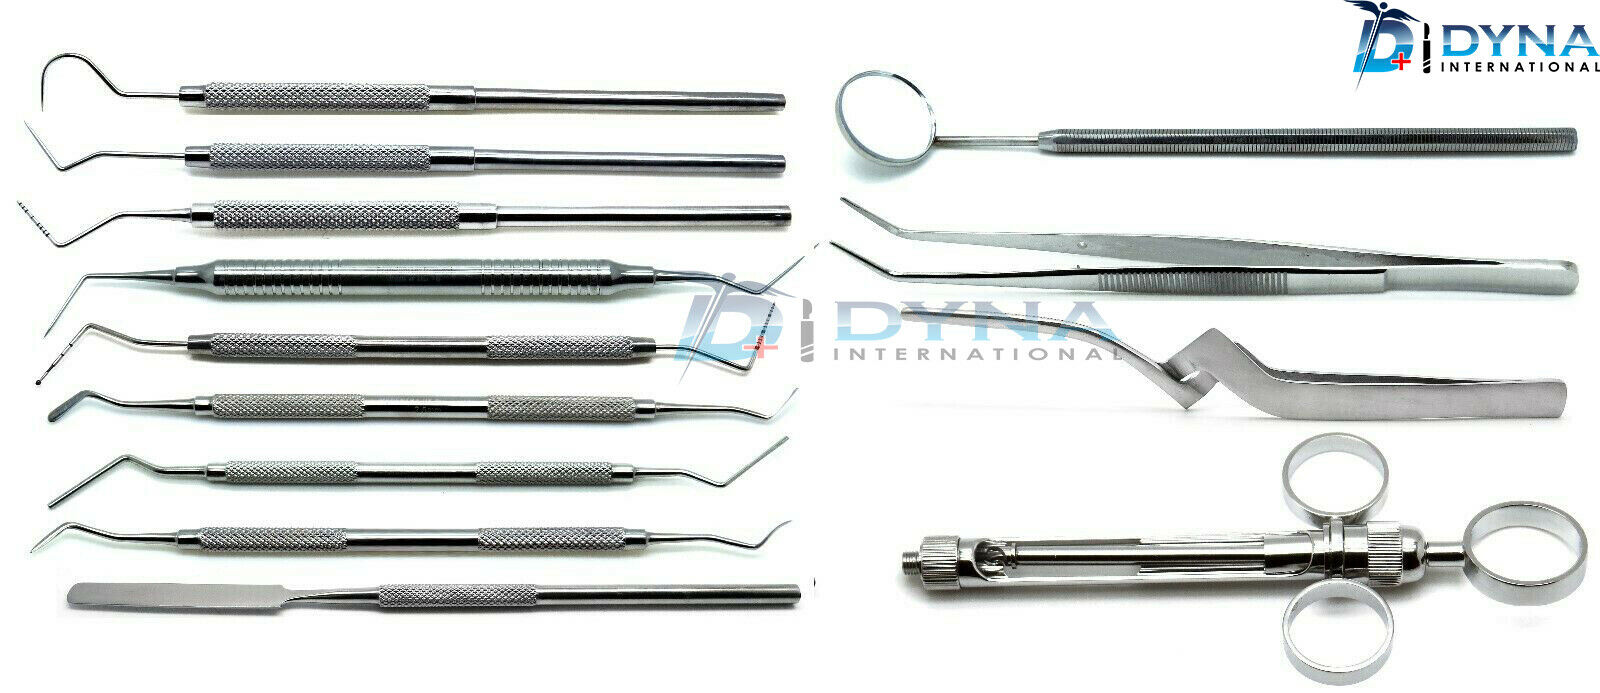 Dental-Root-Canal-Pulpotomy-Tray-Setup-Stainless-Steel-Instruments-Set-of-13-1.jpg